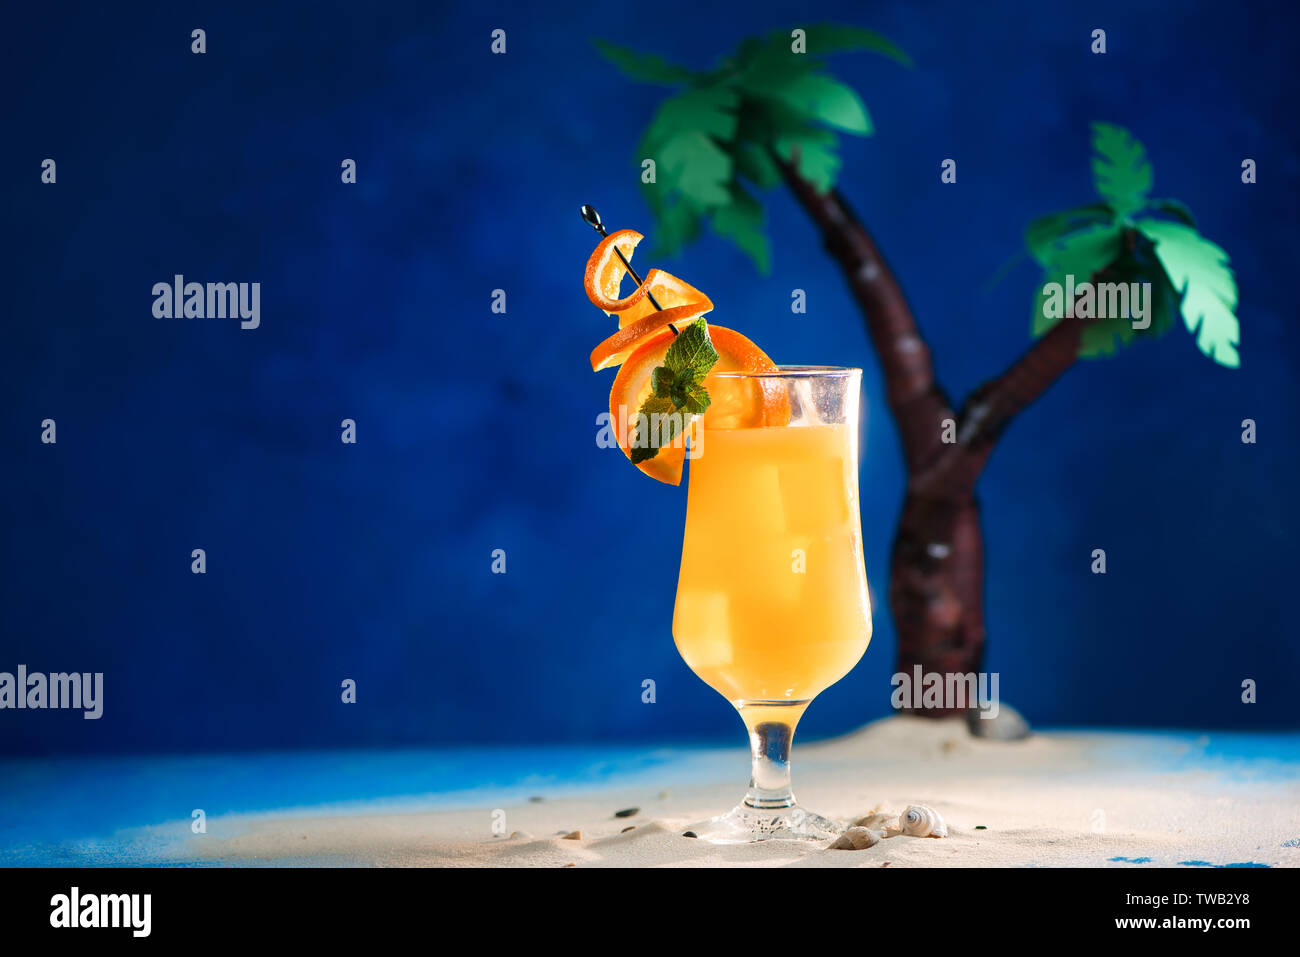 Decorated yellow tropical cocktail in a tulip glass with oranges on a skewer. Papercraft palm trees on a blue background with copy space. Stock Photo